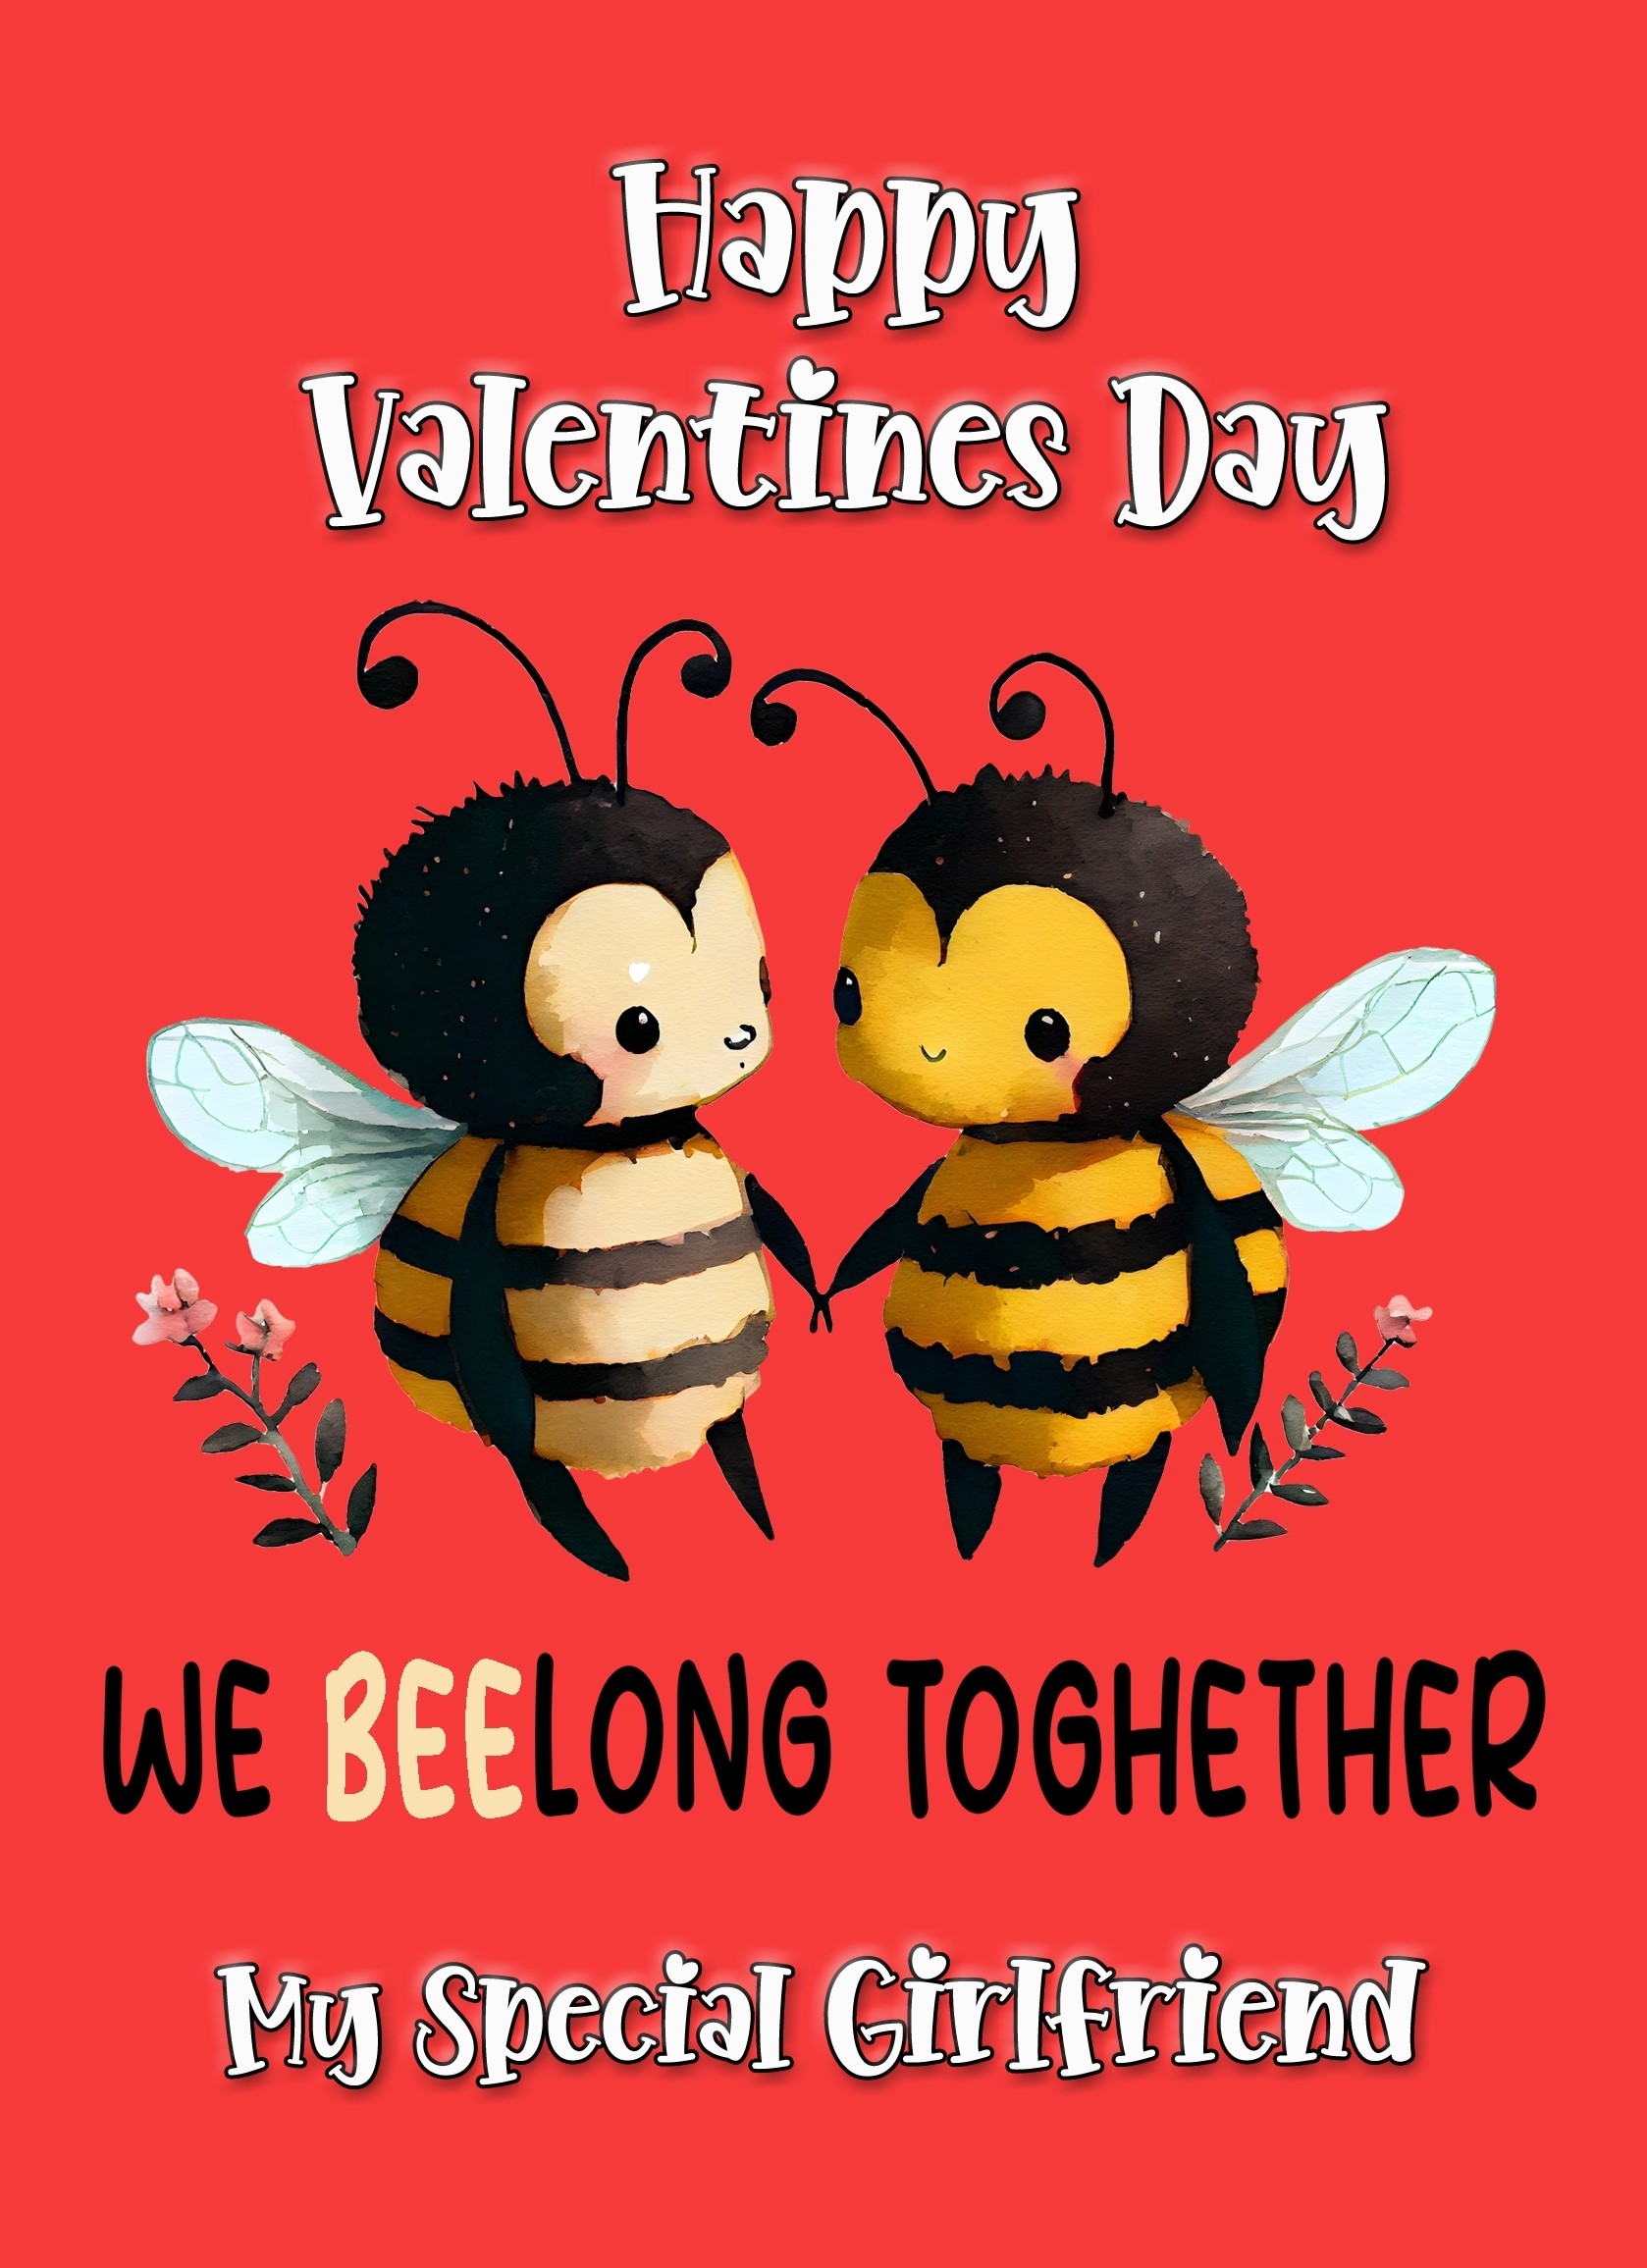 Funny Pun Valentines Day Card for Girlfriend (Beelong Together)